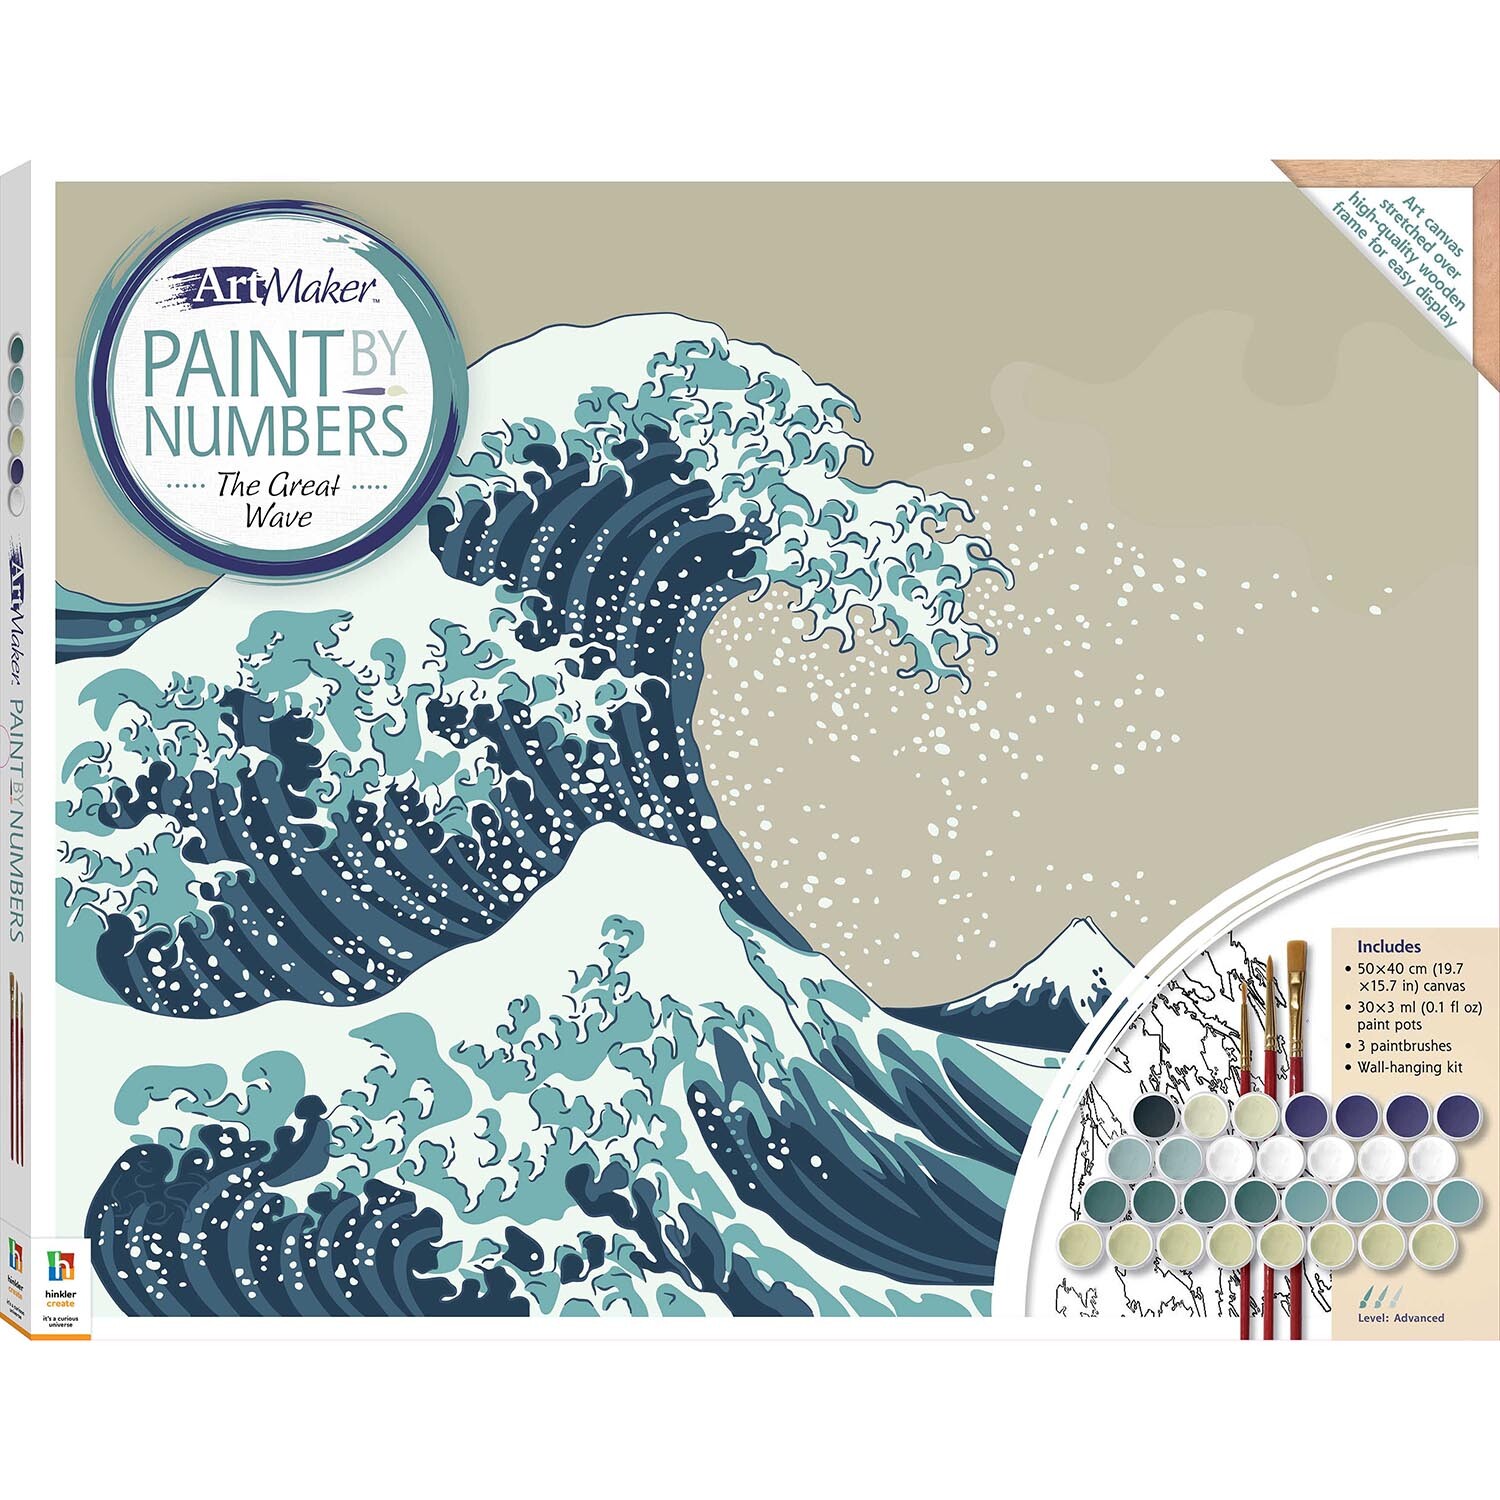 Hinkler Paint Your Own The Great Wave Canvas Kit Image